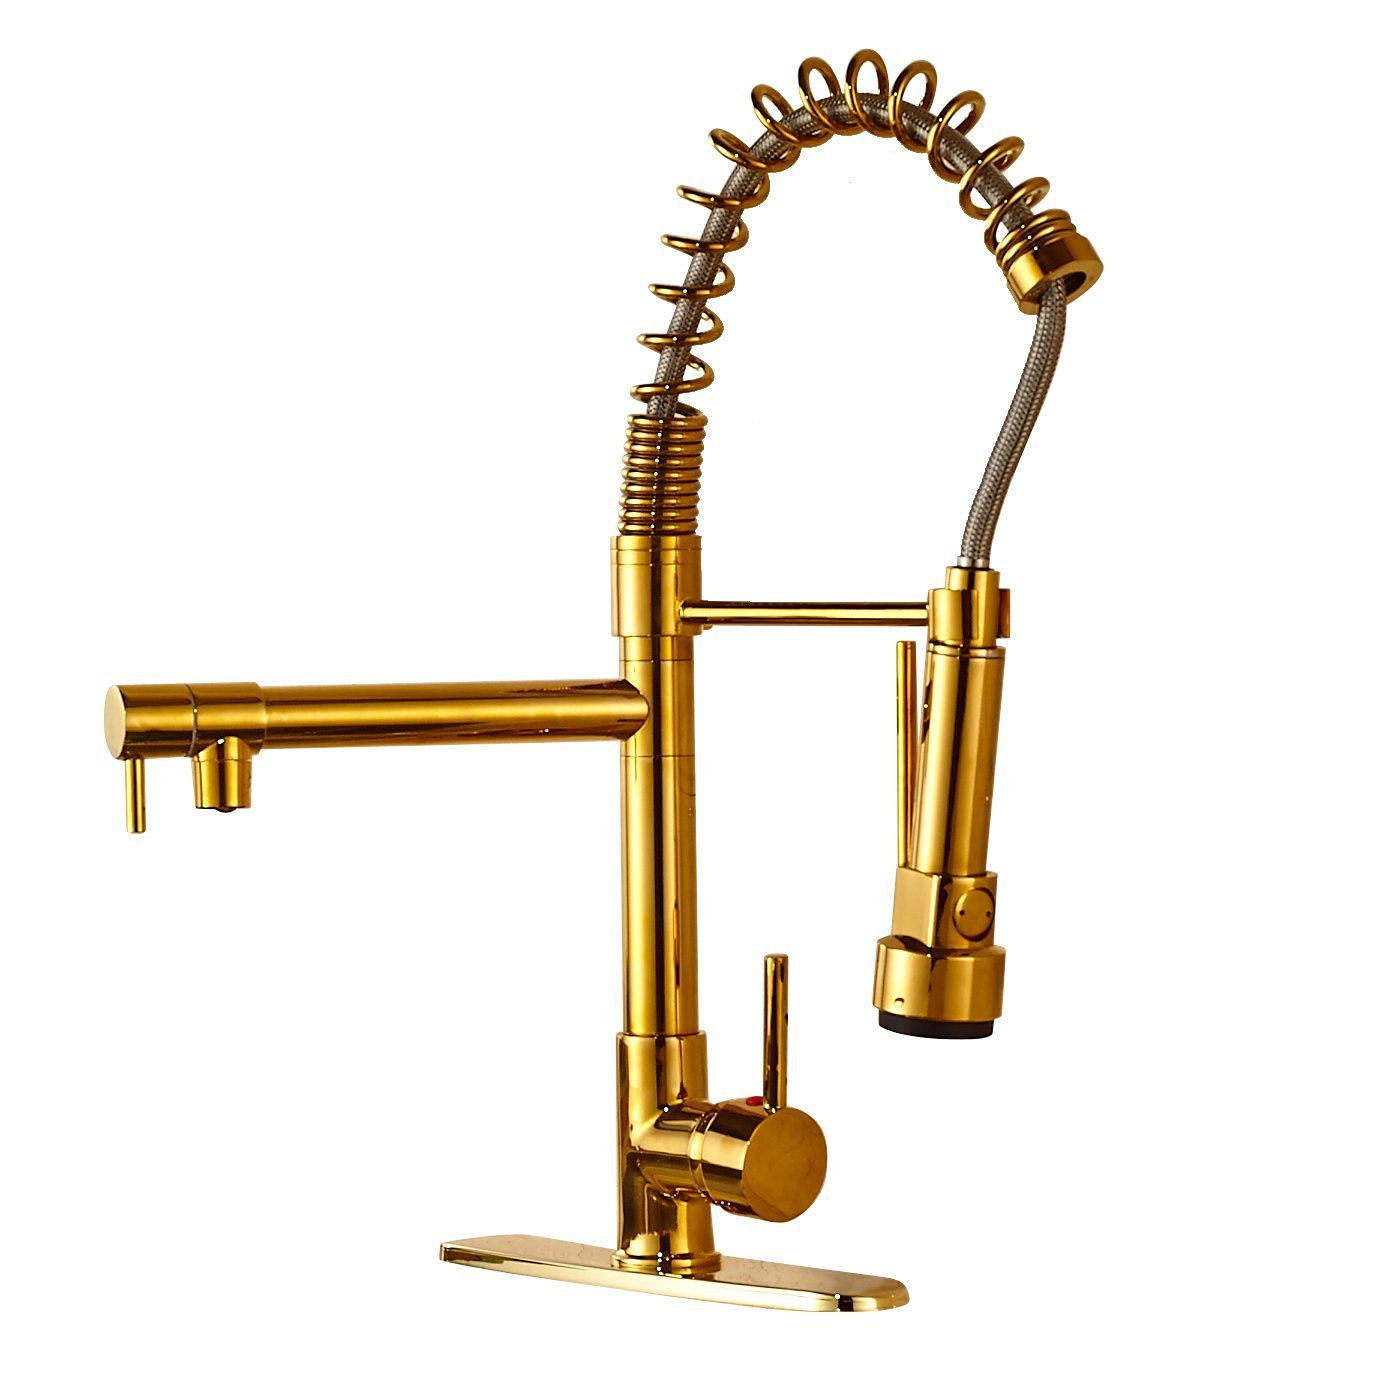 Venezuela Gold Finish Kitchen Sink Faucet with Pull Down Faucet